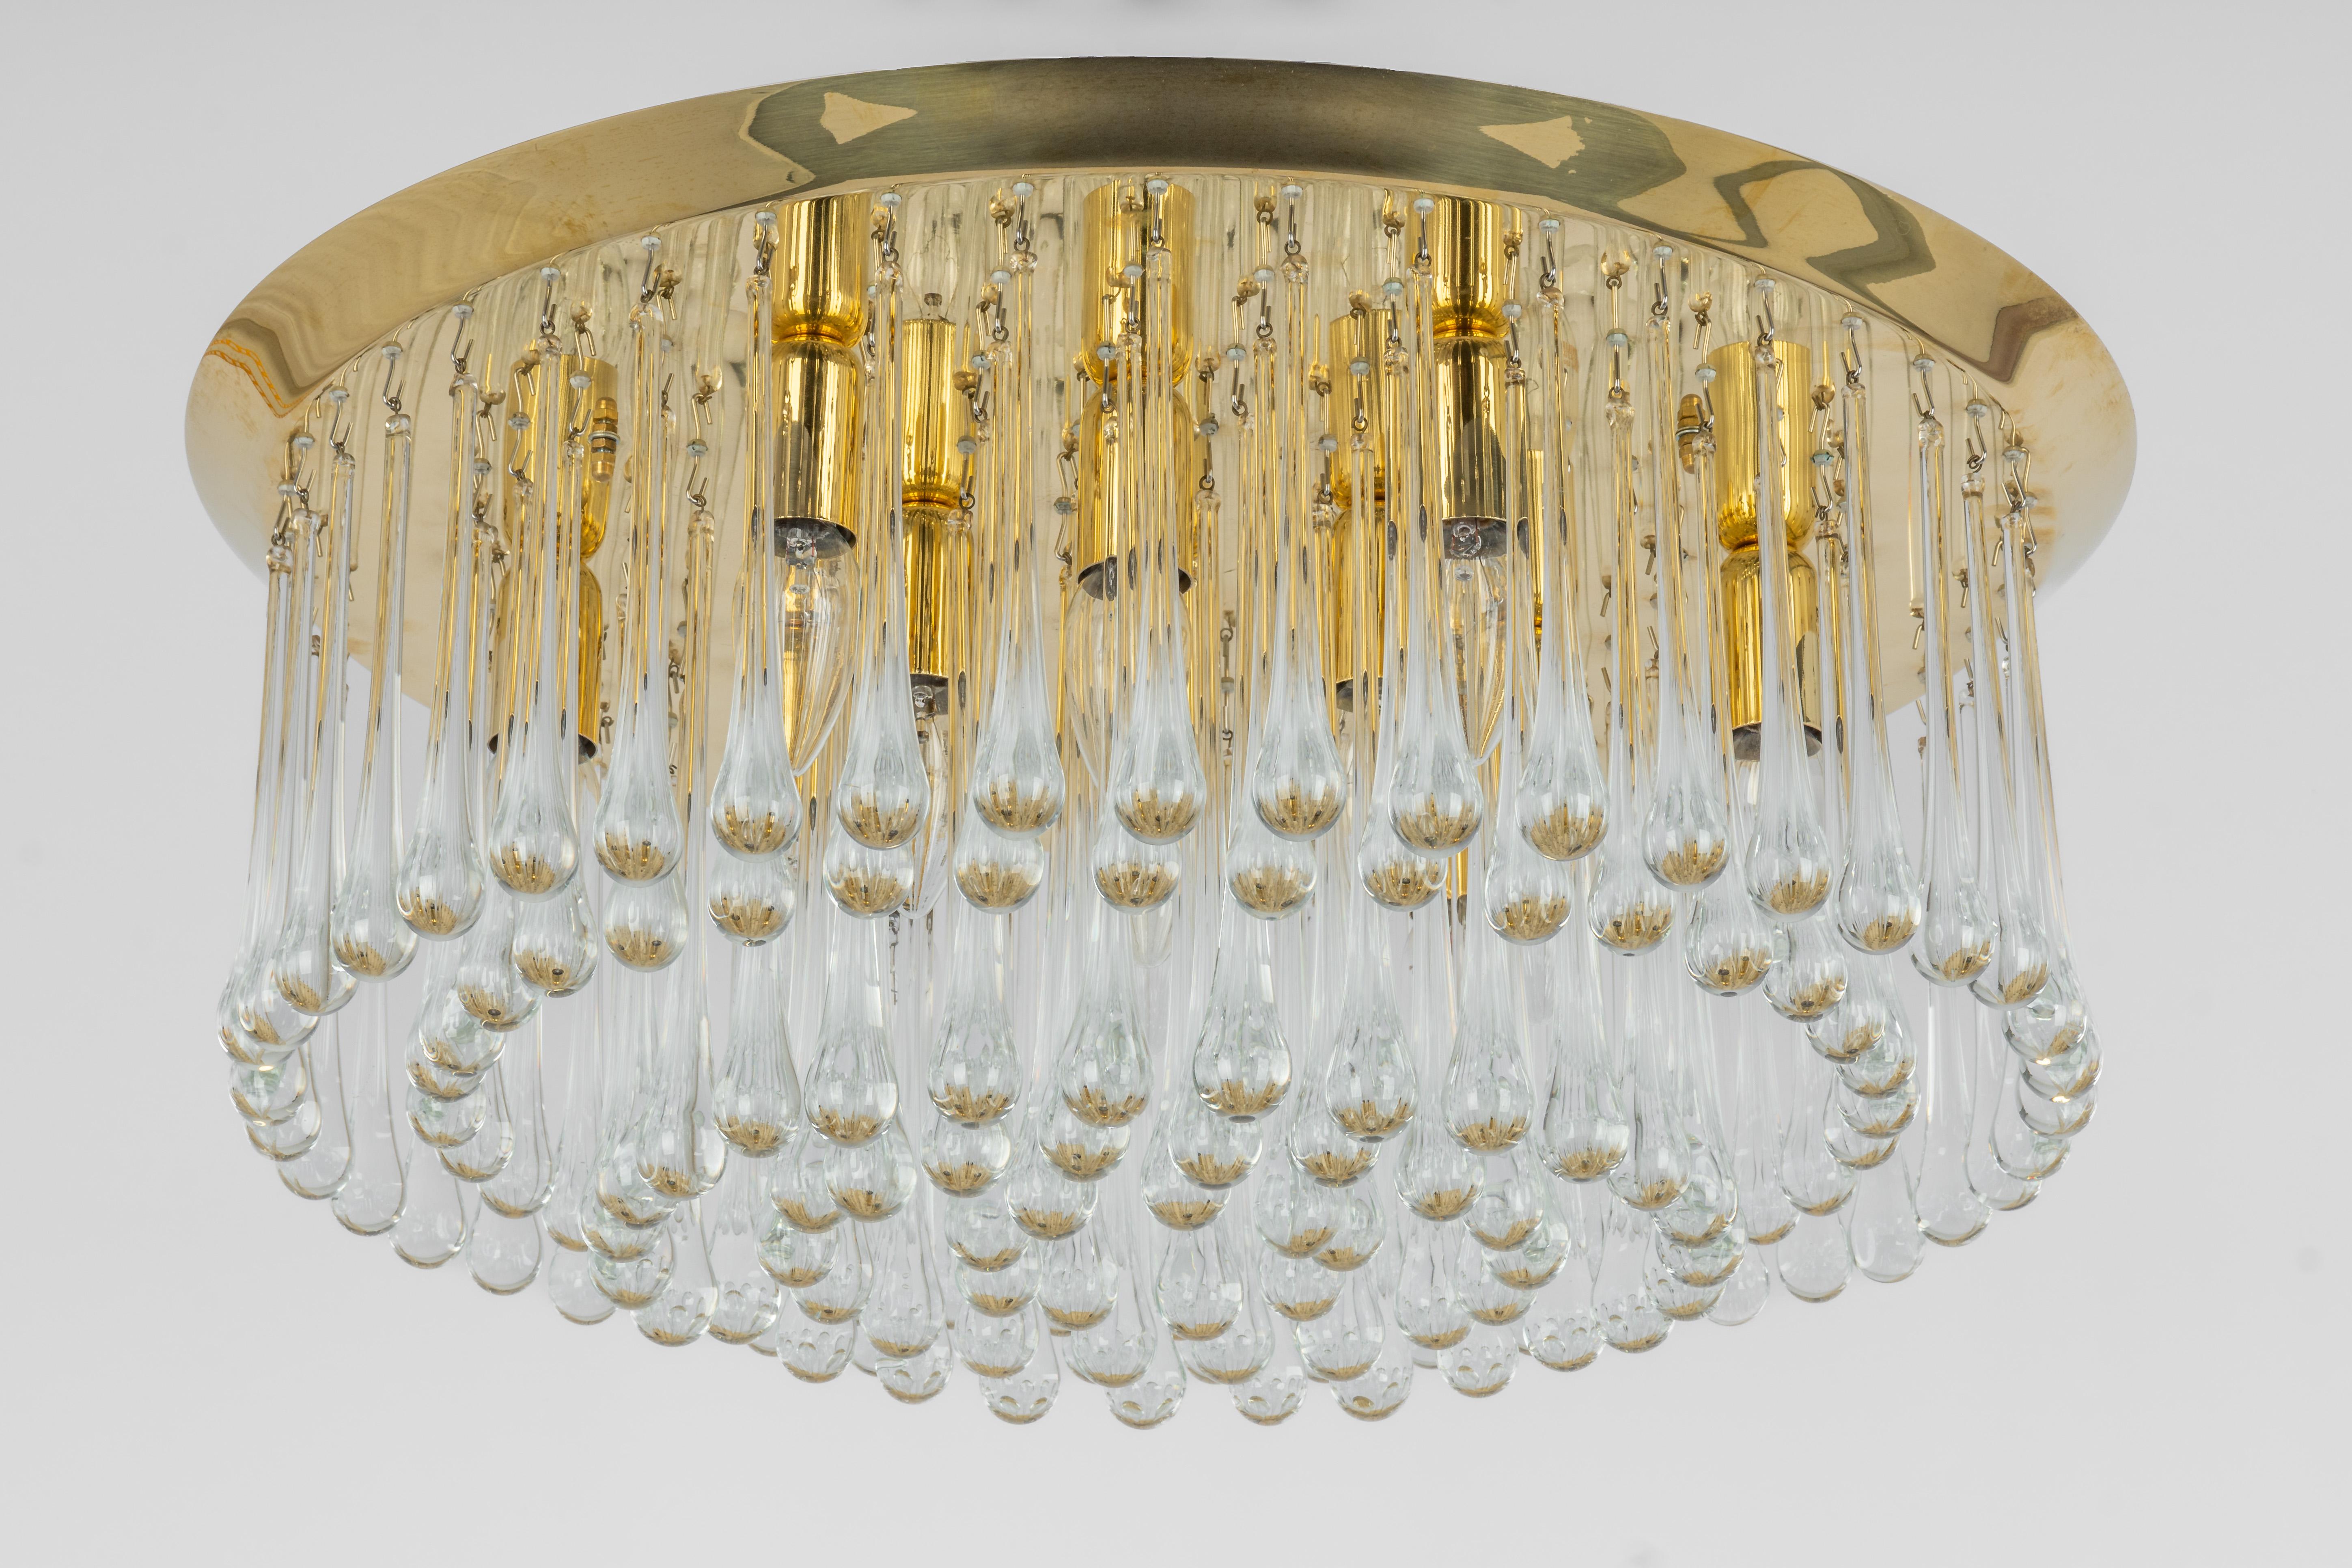 A wonderful gilt brass light fixture comprises many crystal teardrop glass pieces on a brass frame. Its made by Kalmar (Serie: Tropfen), Austria, manufactured, circa 1970-1979.

It needs 13 small bulbs (E-14 , 40 W for each bulb)
Light bulbs are